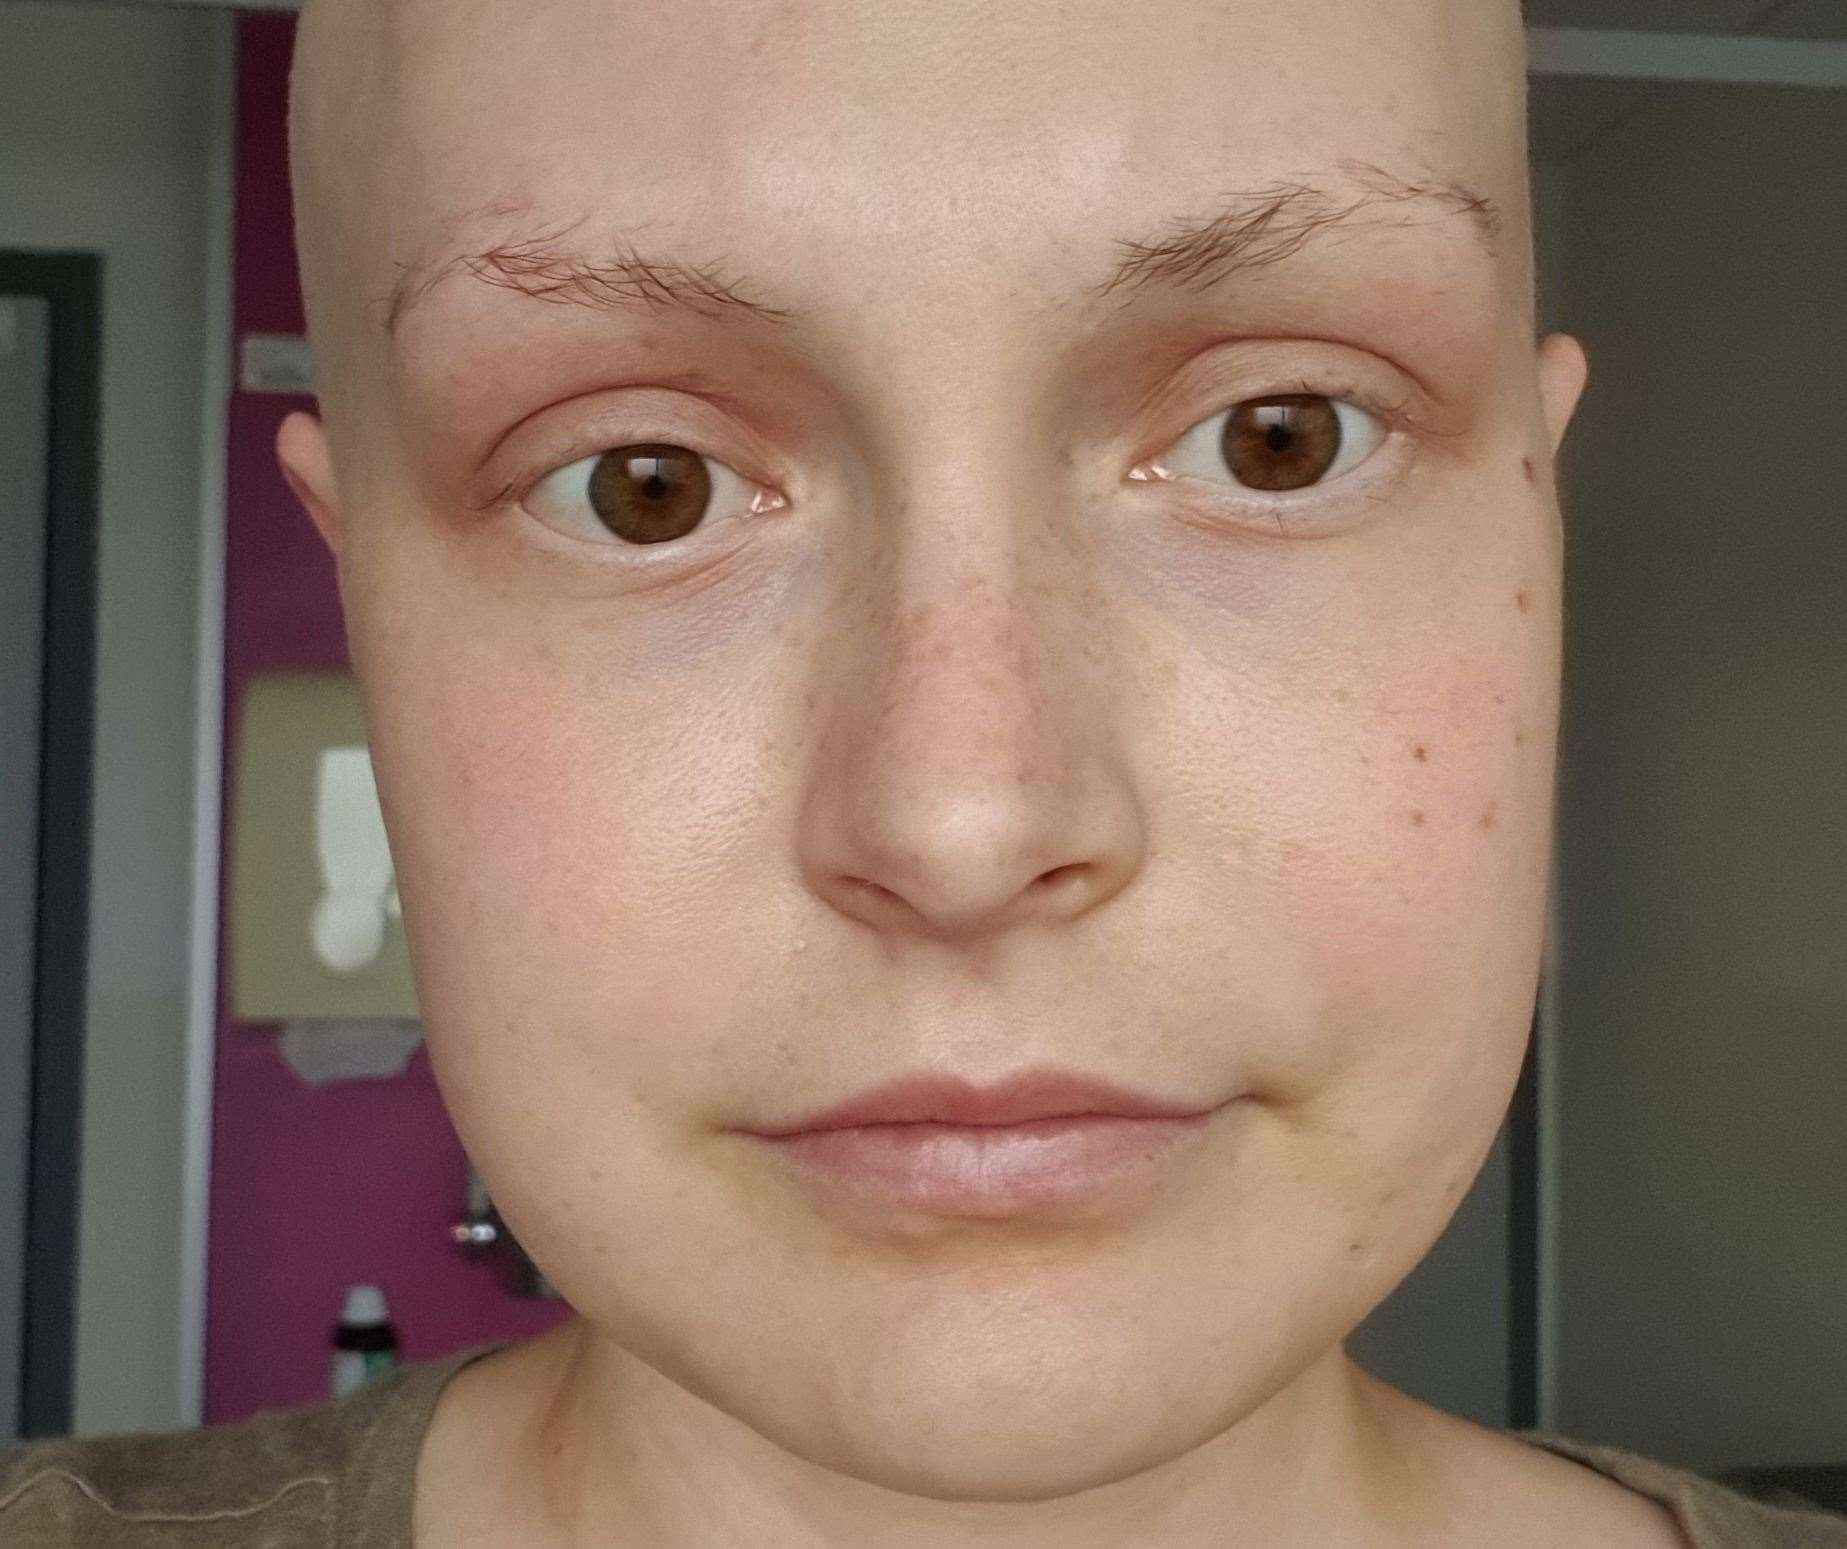 The 24-year-old is warning others about her symptoms. Picture: SWNS